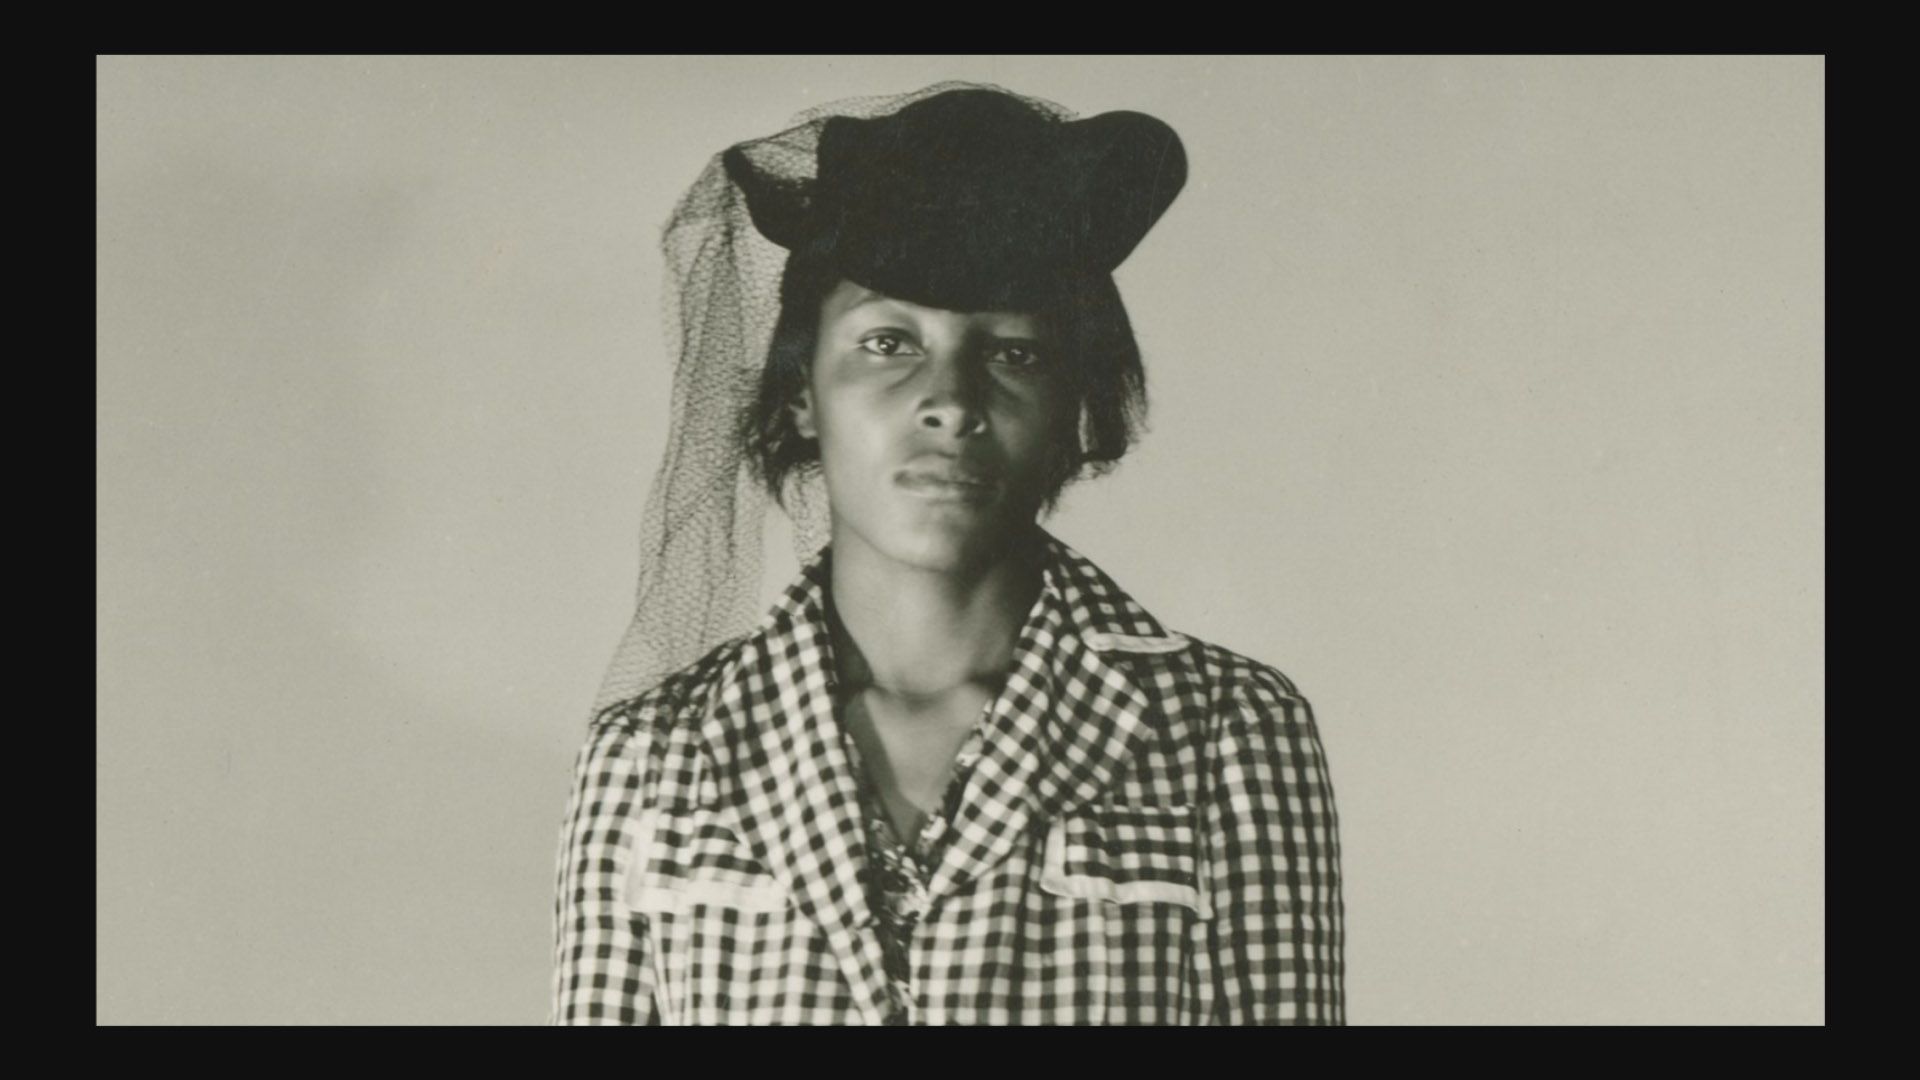 Recy Taylor 2019 1 16